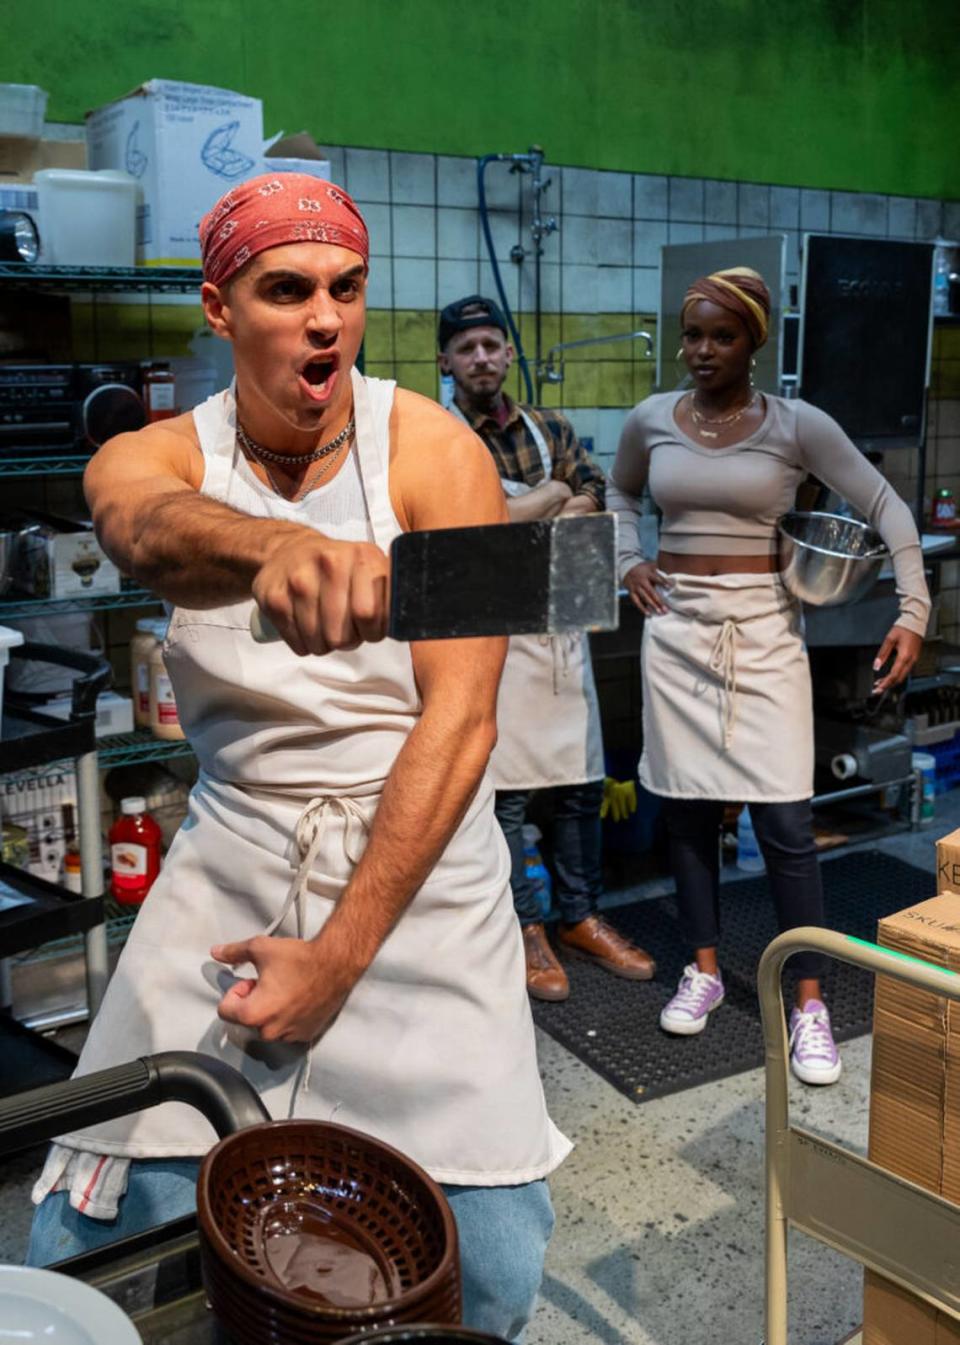 From left, Gabriell Salgado shows off his grill ninja skills as Kristian Bikic and Sydney Presendieu gawk in Zoetic Stage’s production of “Clyde’s.” (Photo courtesy of Morgan Sophia Photography)